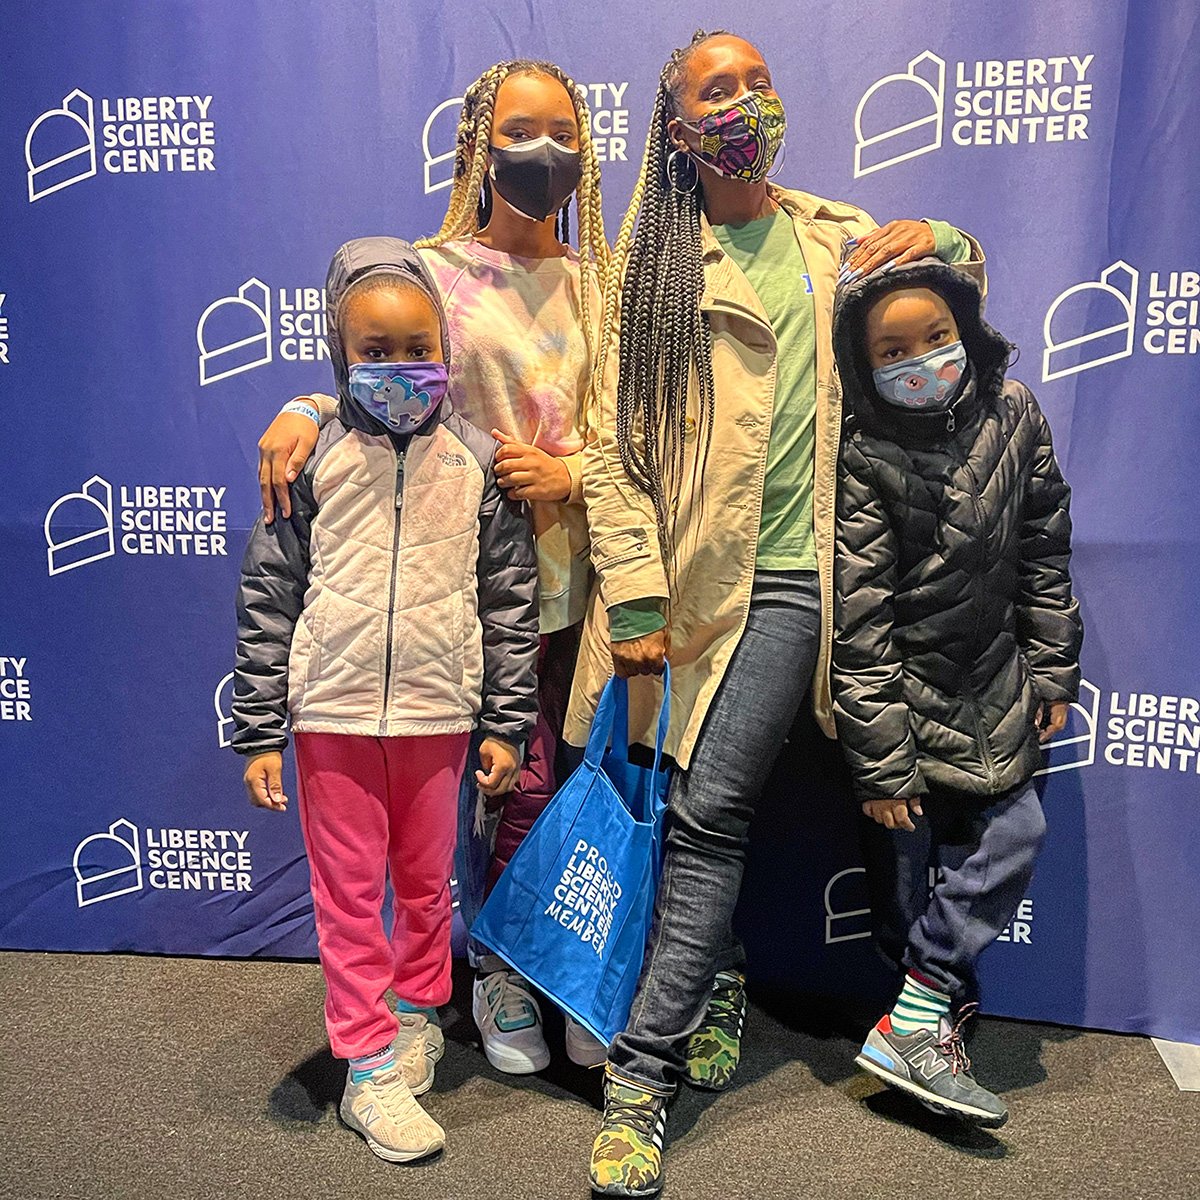 A pandemic visit to the Liberty Science Center in New Jersey.